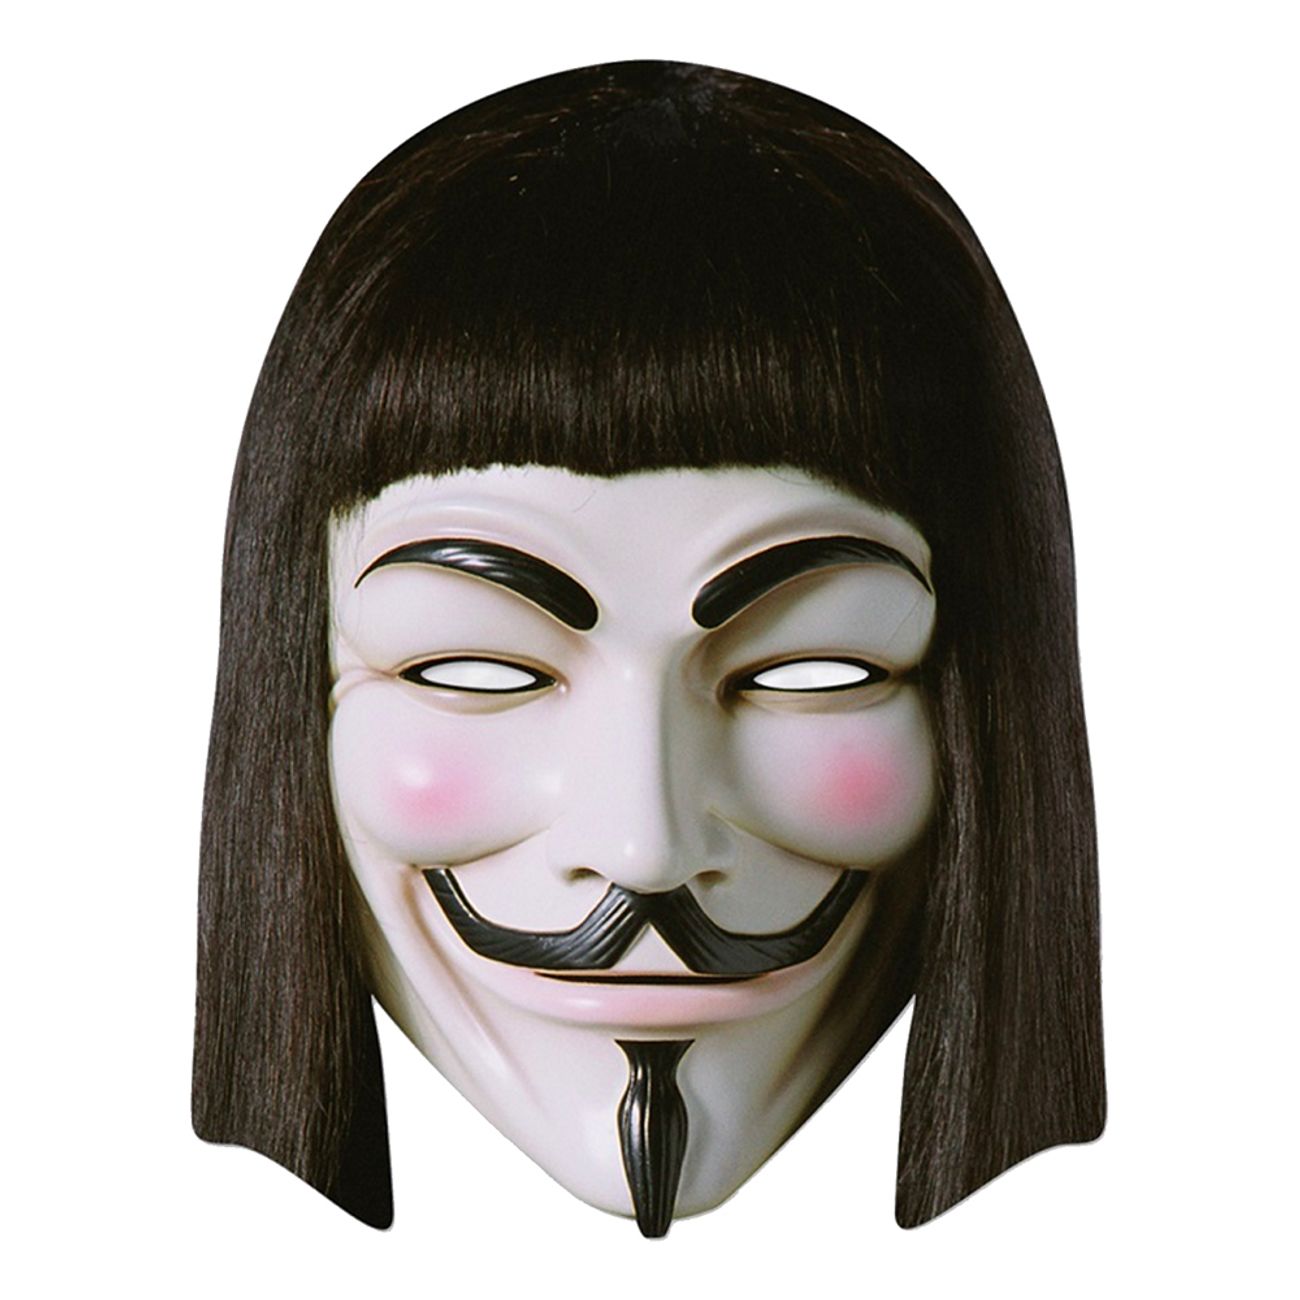 guy-fawkes-pappmask-1